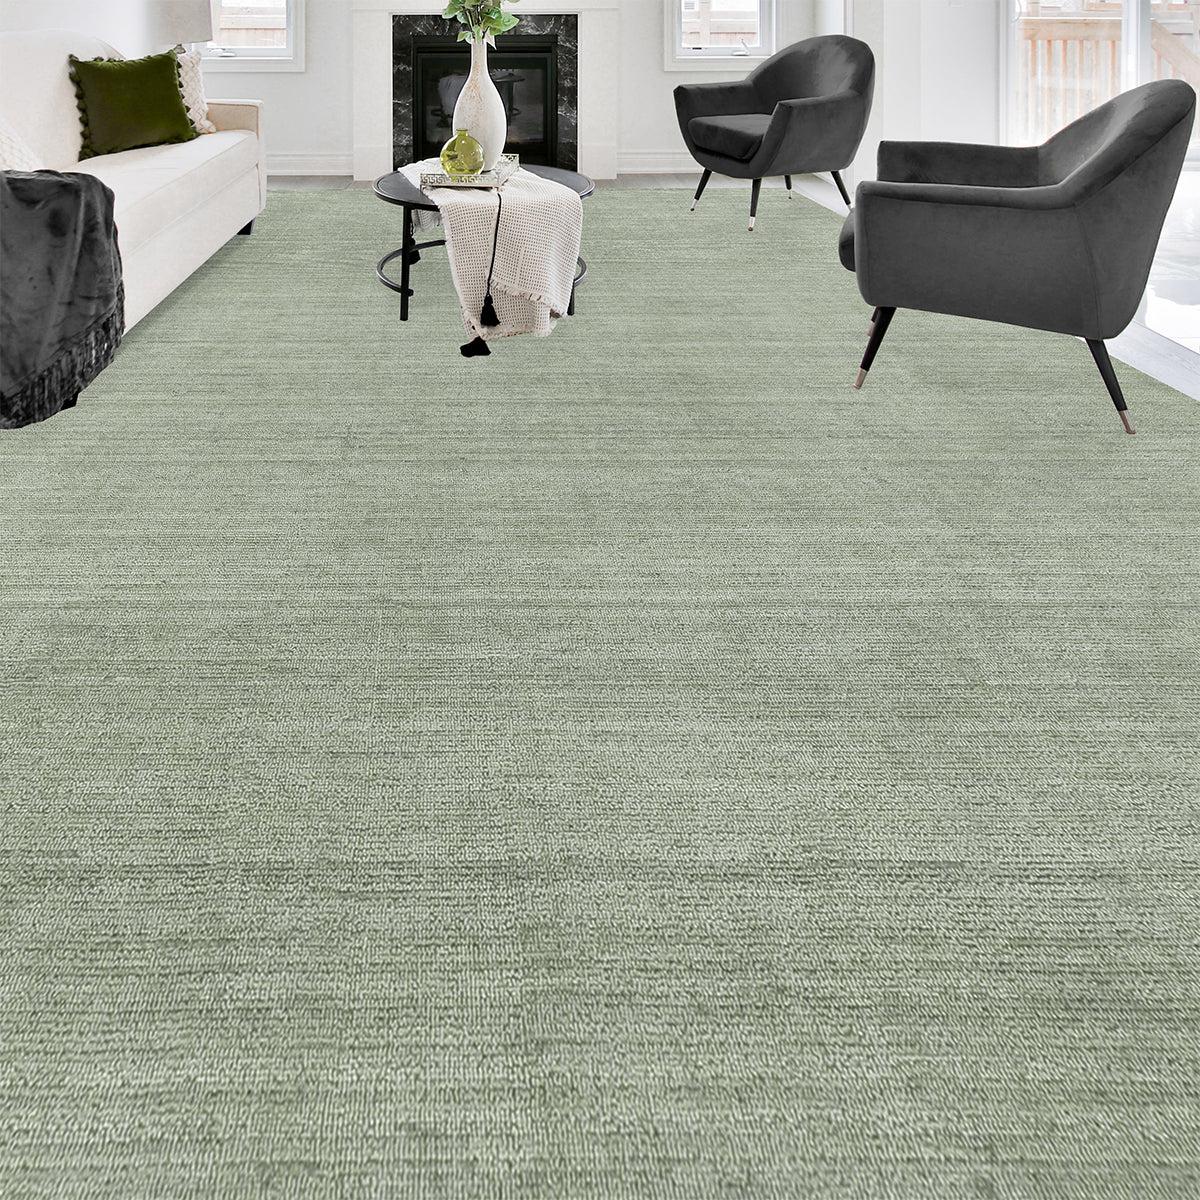 A subtle sense of texture is created by the high / low surface of this sophisticated collection of hand-loomed designs. This luxurious light green rug composed of the finest viscose, has a surface that is as soft to the hand as it is rich to the